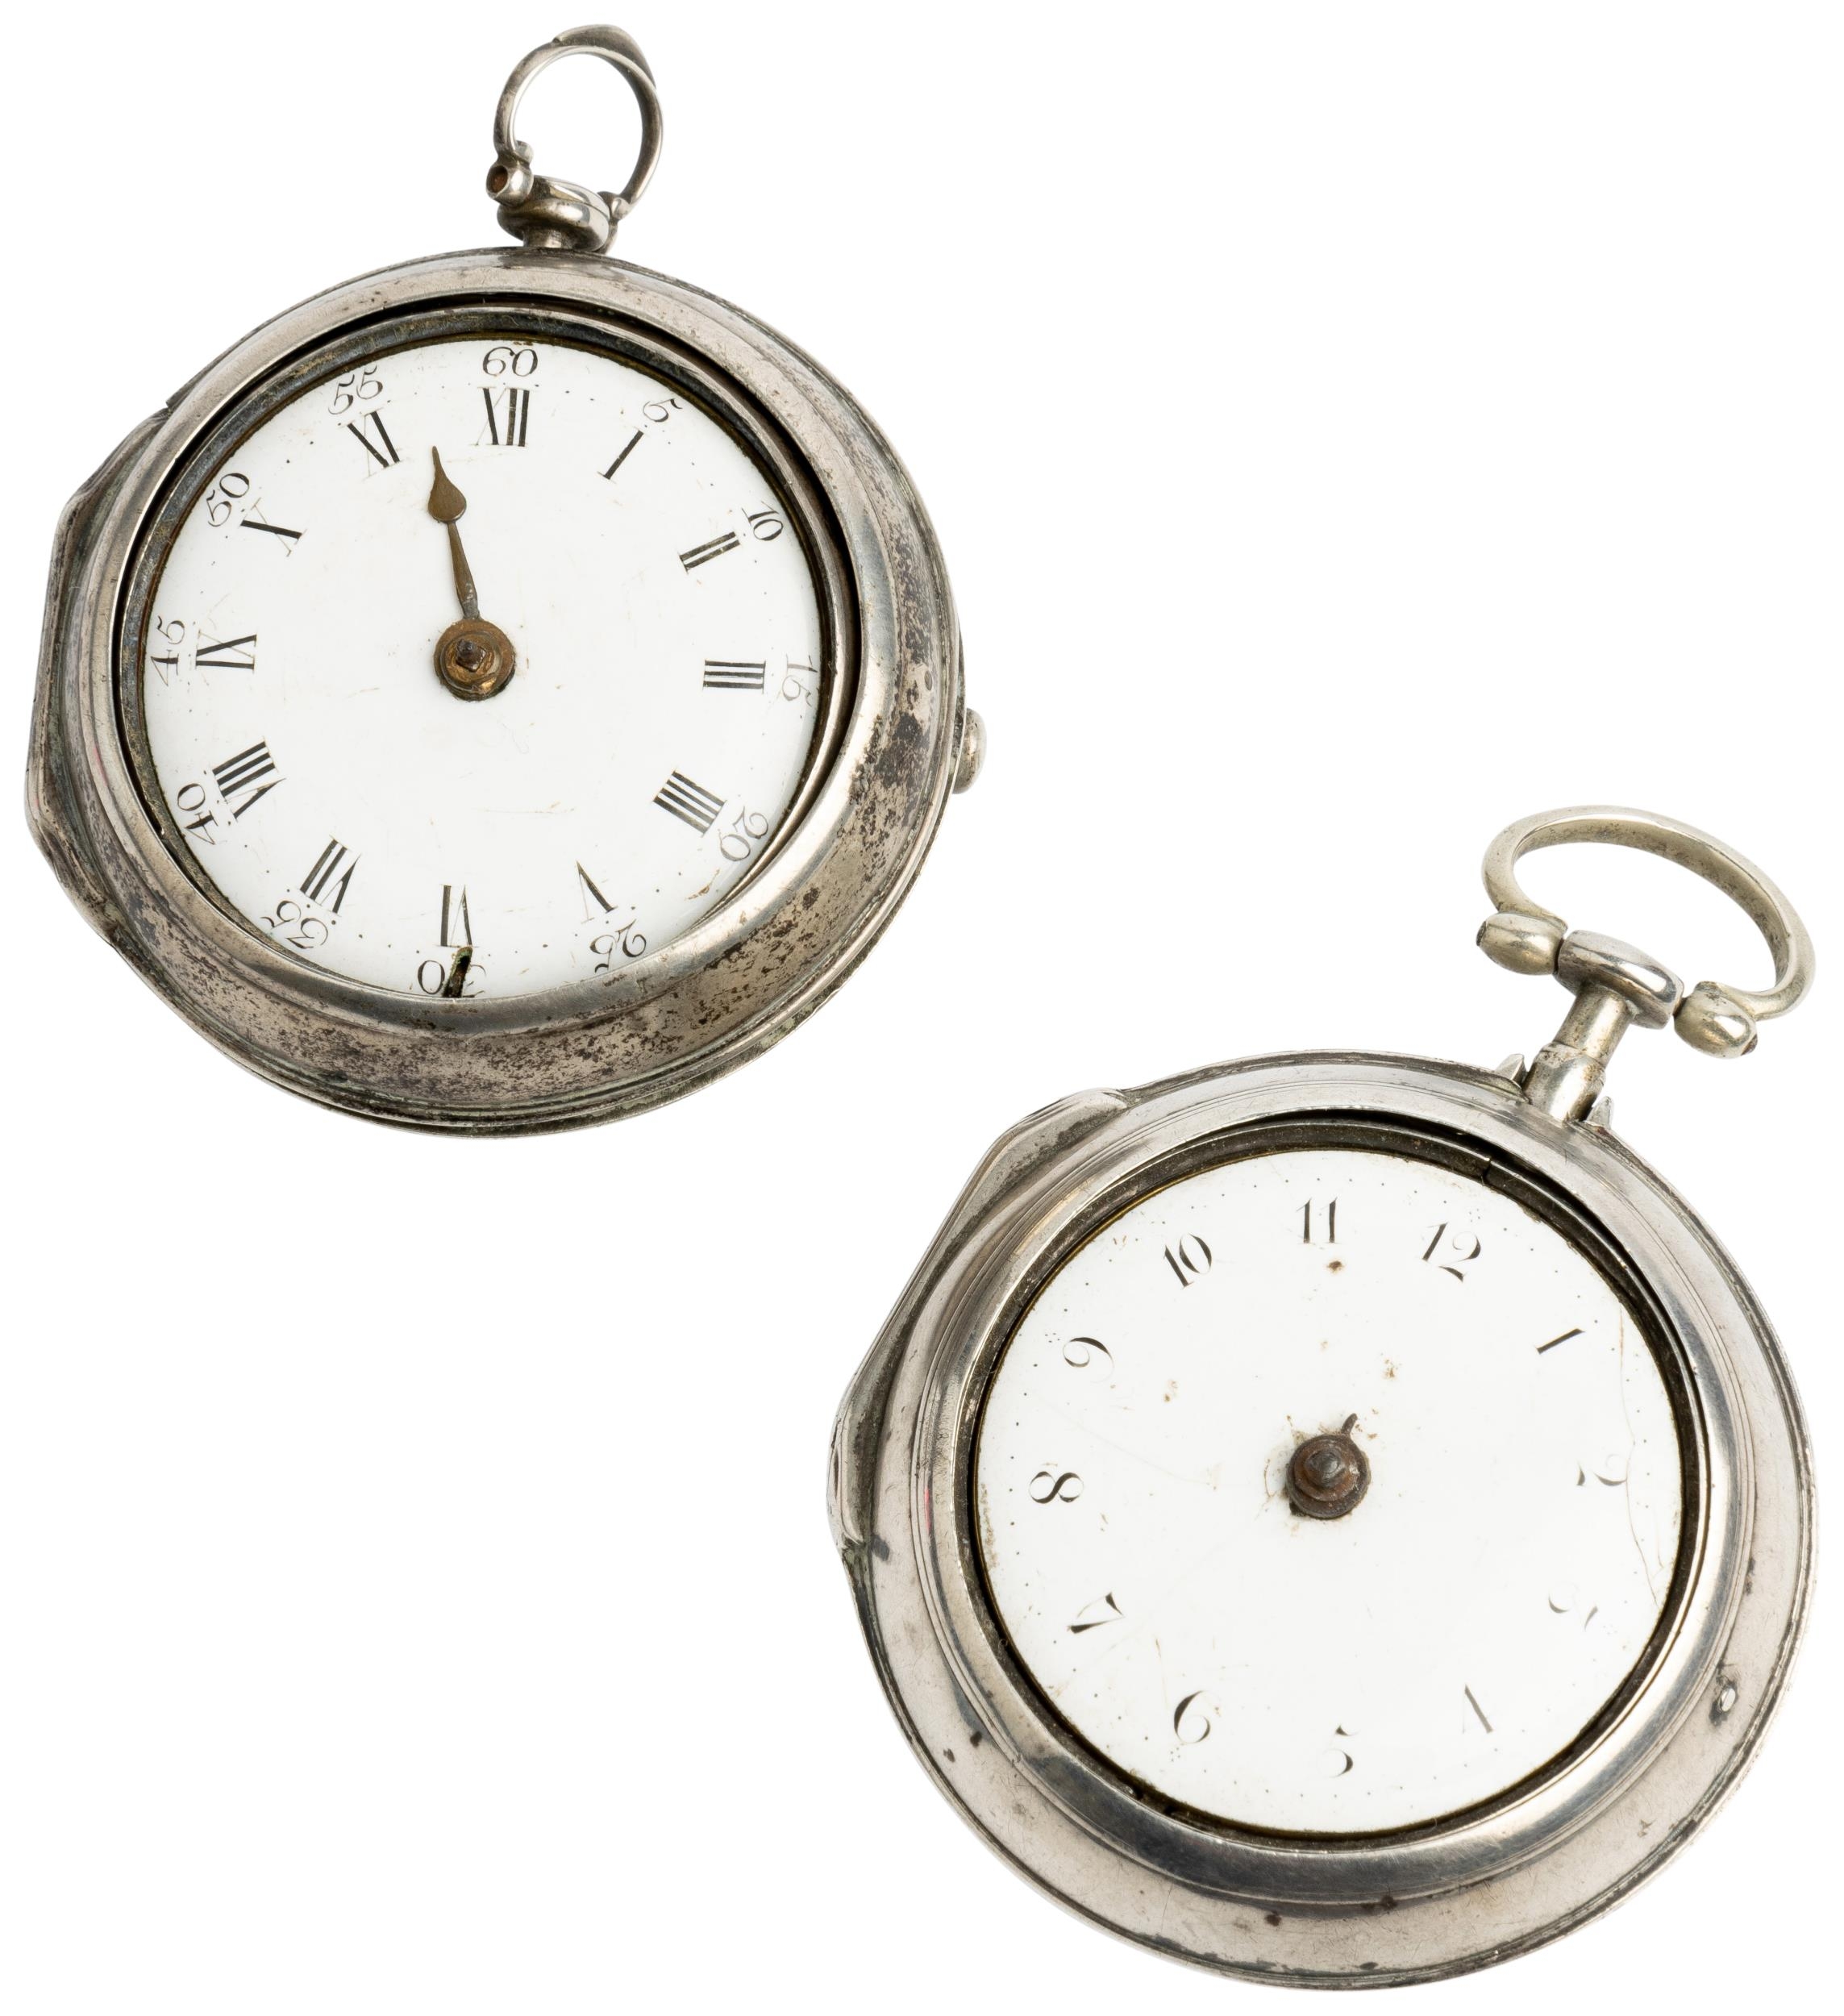 A SILVER PAIR CASED VERGE WATCH. Signed lenvis, London, square baluster pillars, enamel dial with